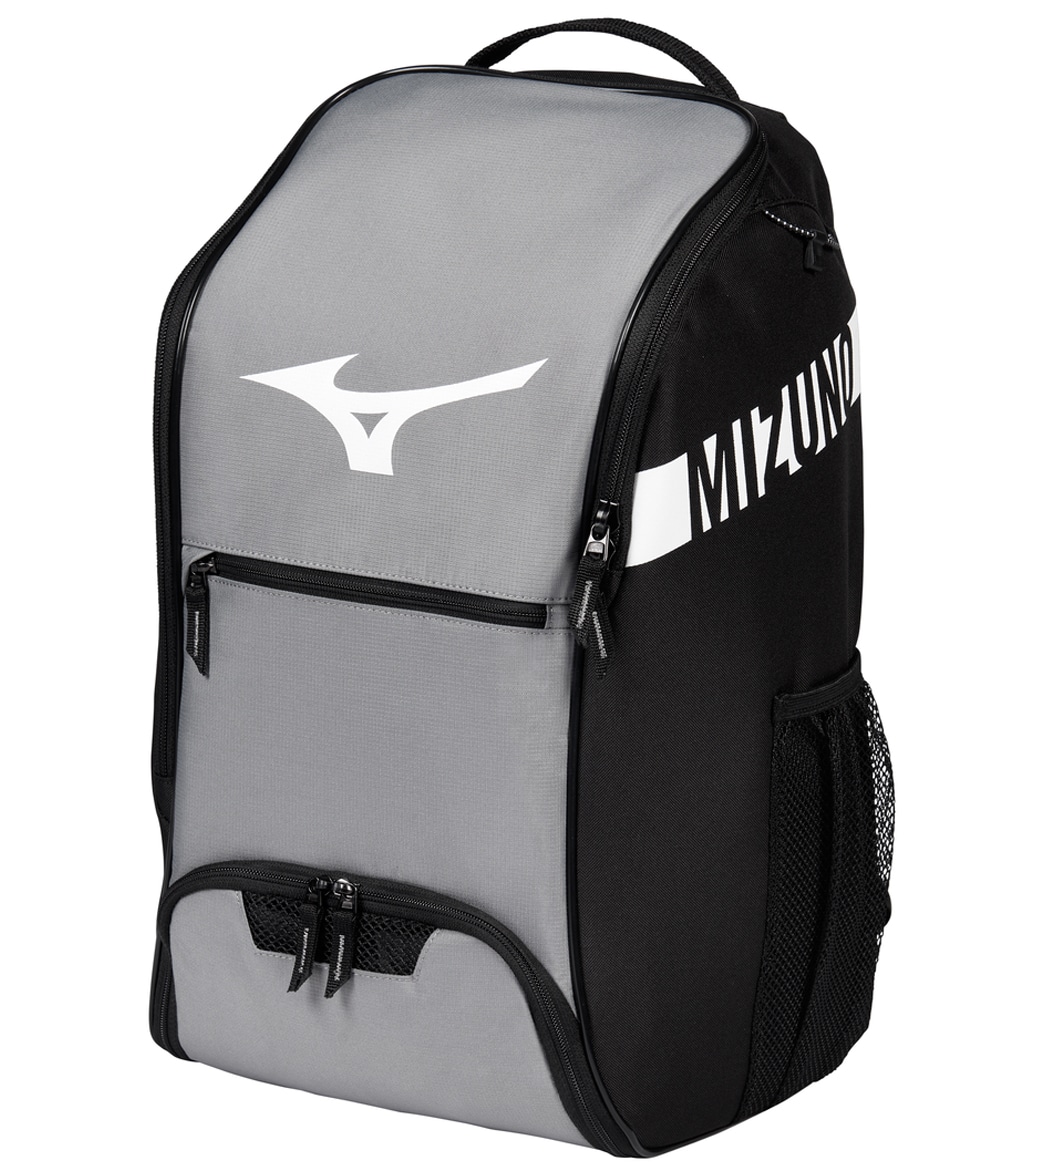 Mizuno Swimwear Crossover 22 Backpack - Charcoal/Black One Size - Swimoutlet.com